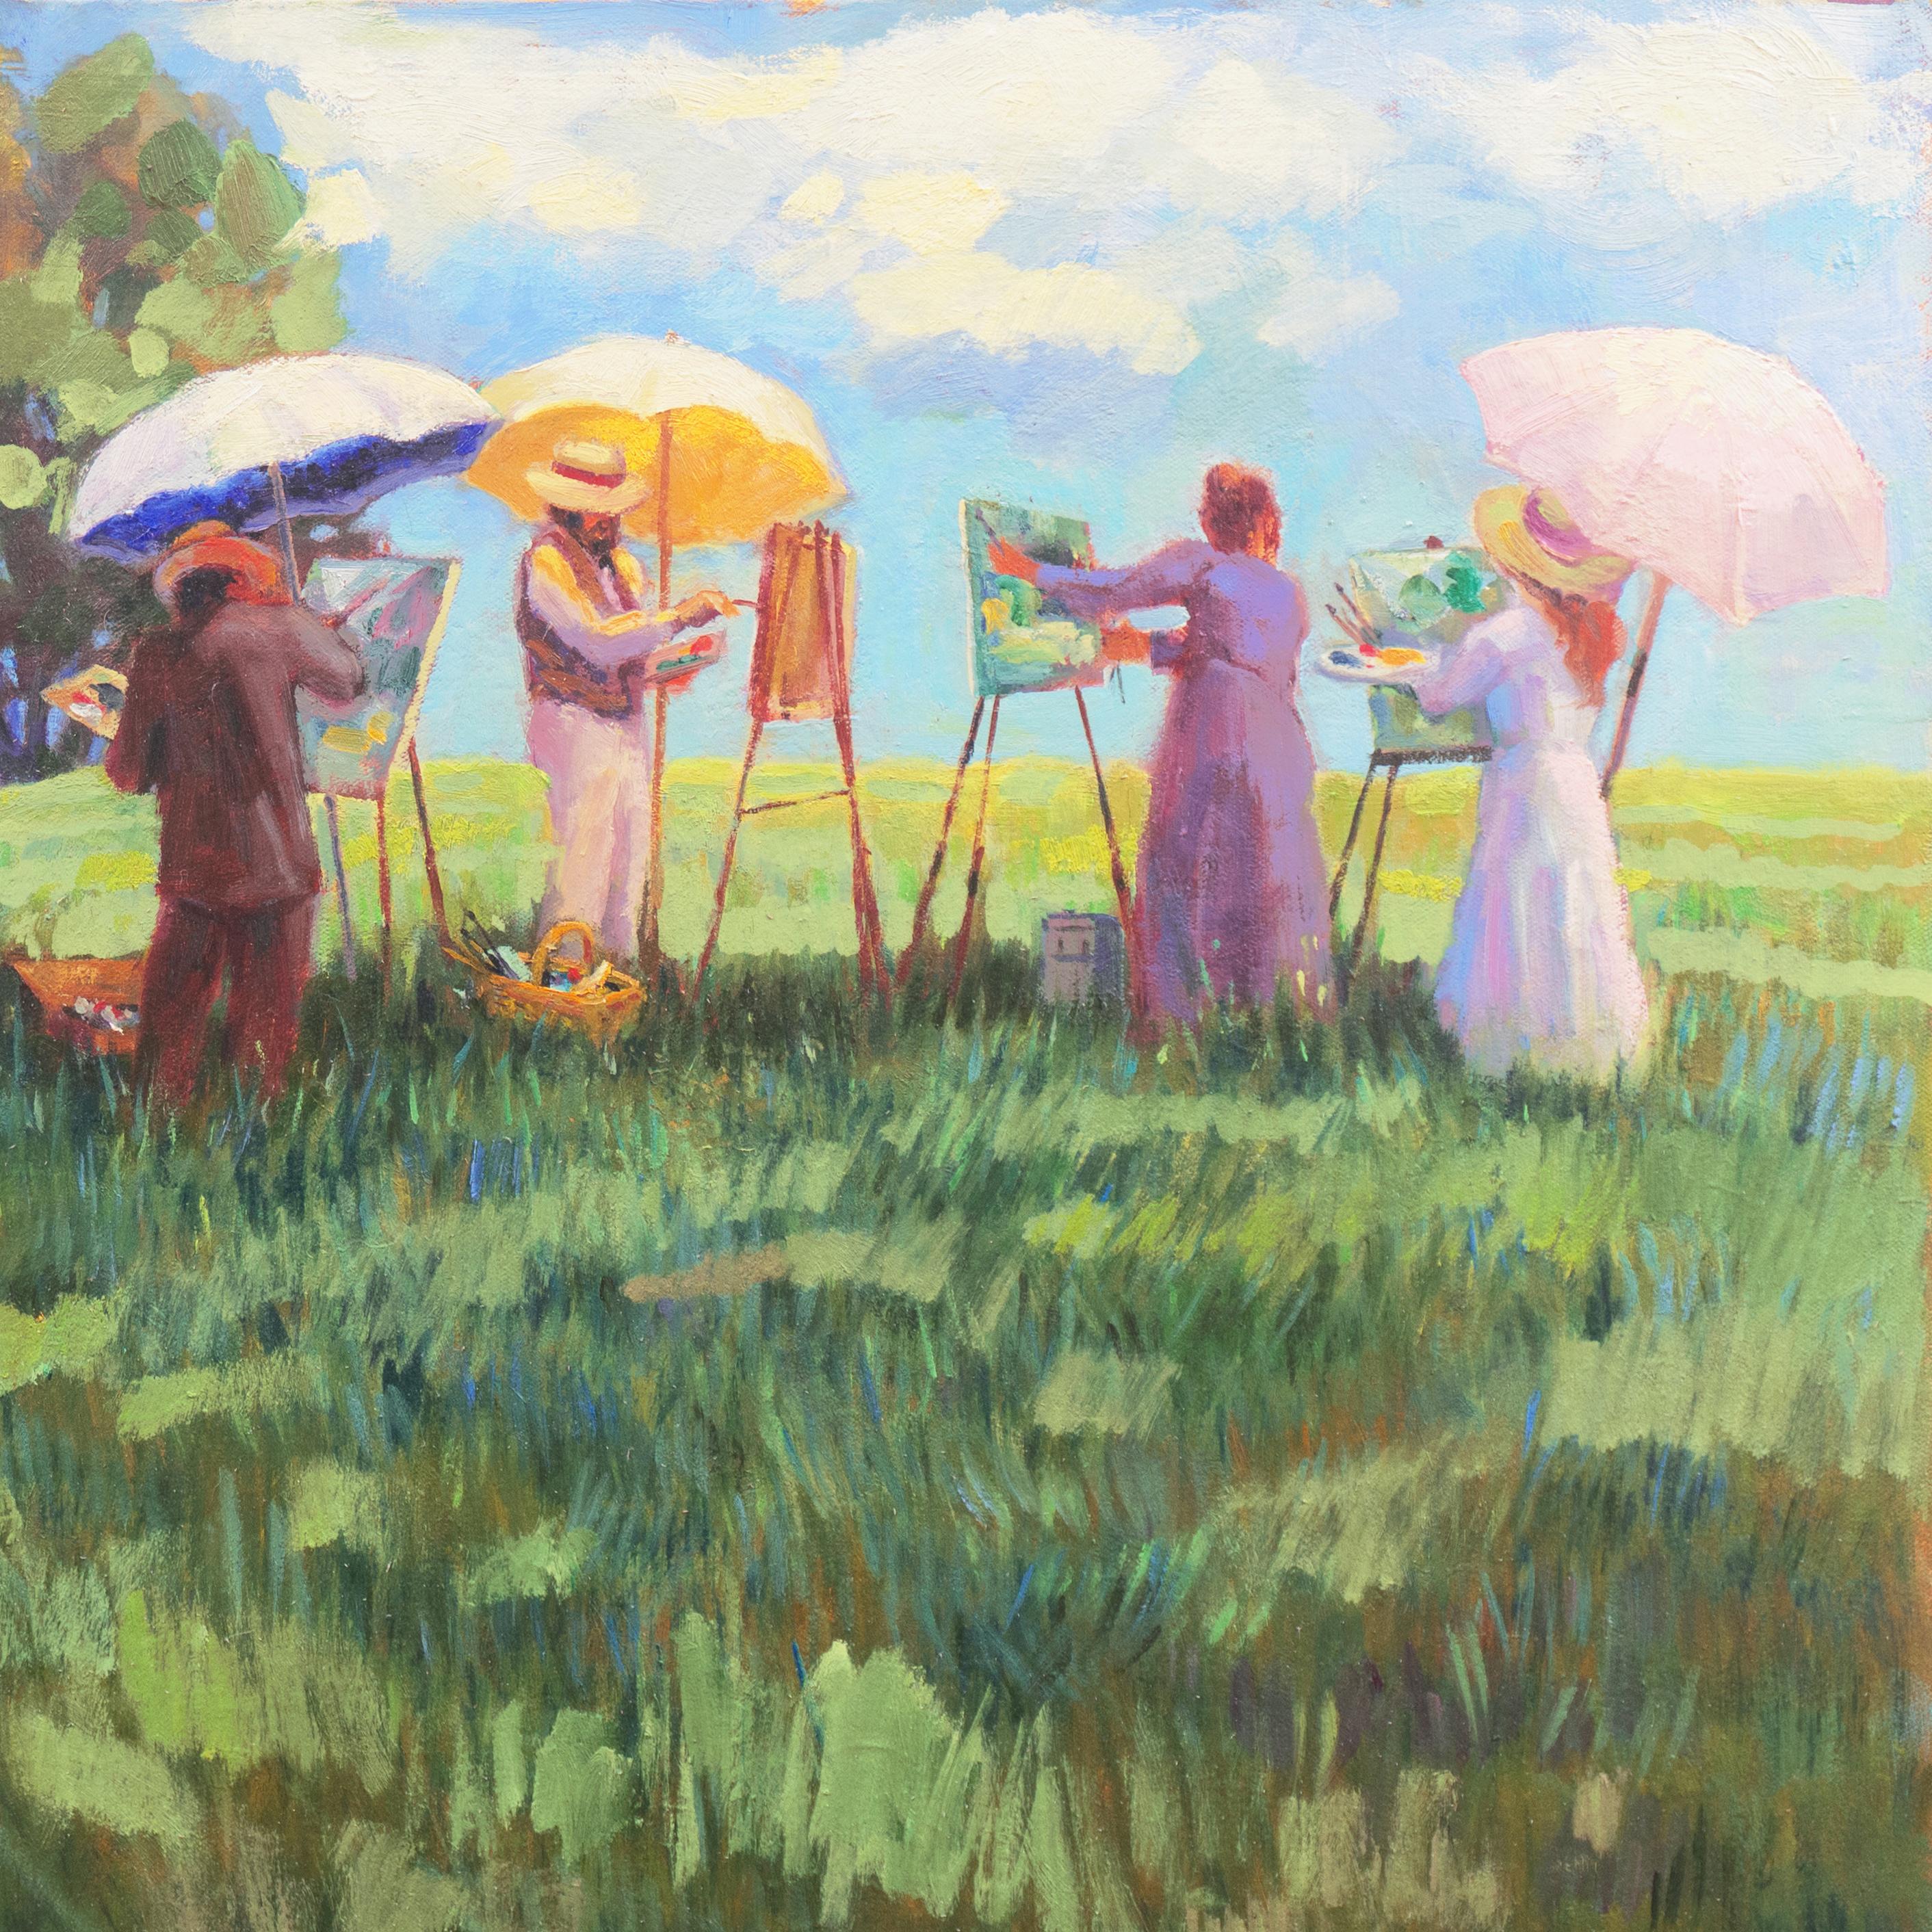 'Edwardian Plein-Air Painters', Summer Landscape with Artists Working - Gray Figurative Painting by Mel Kane